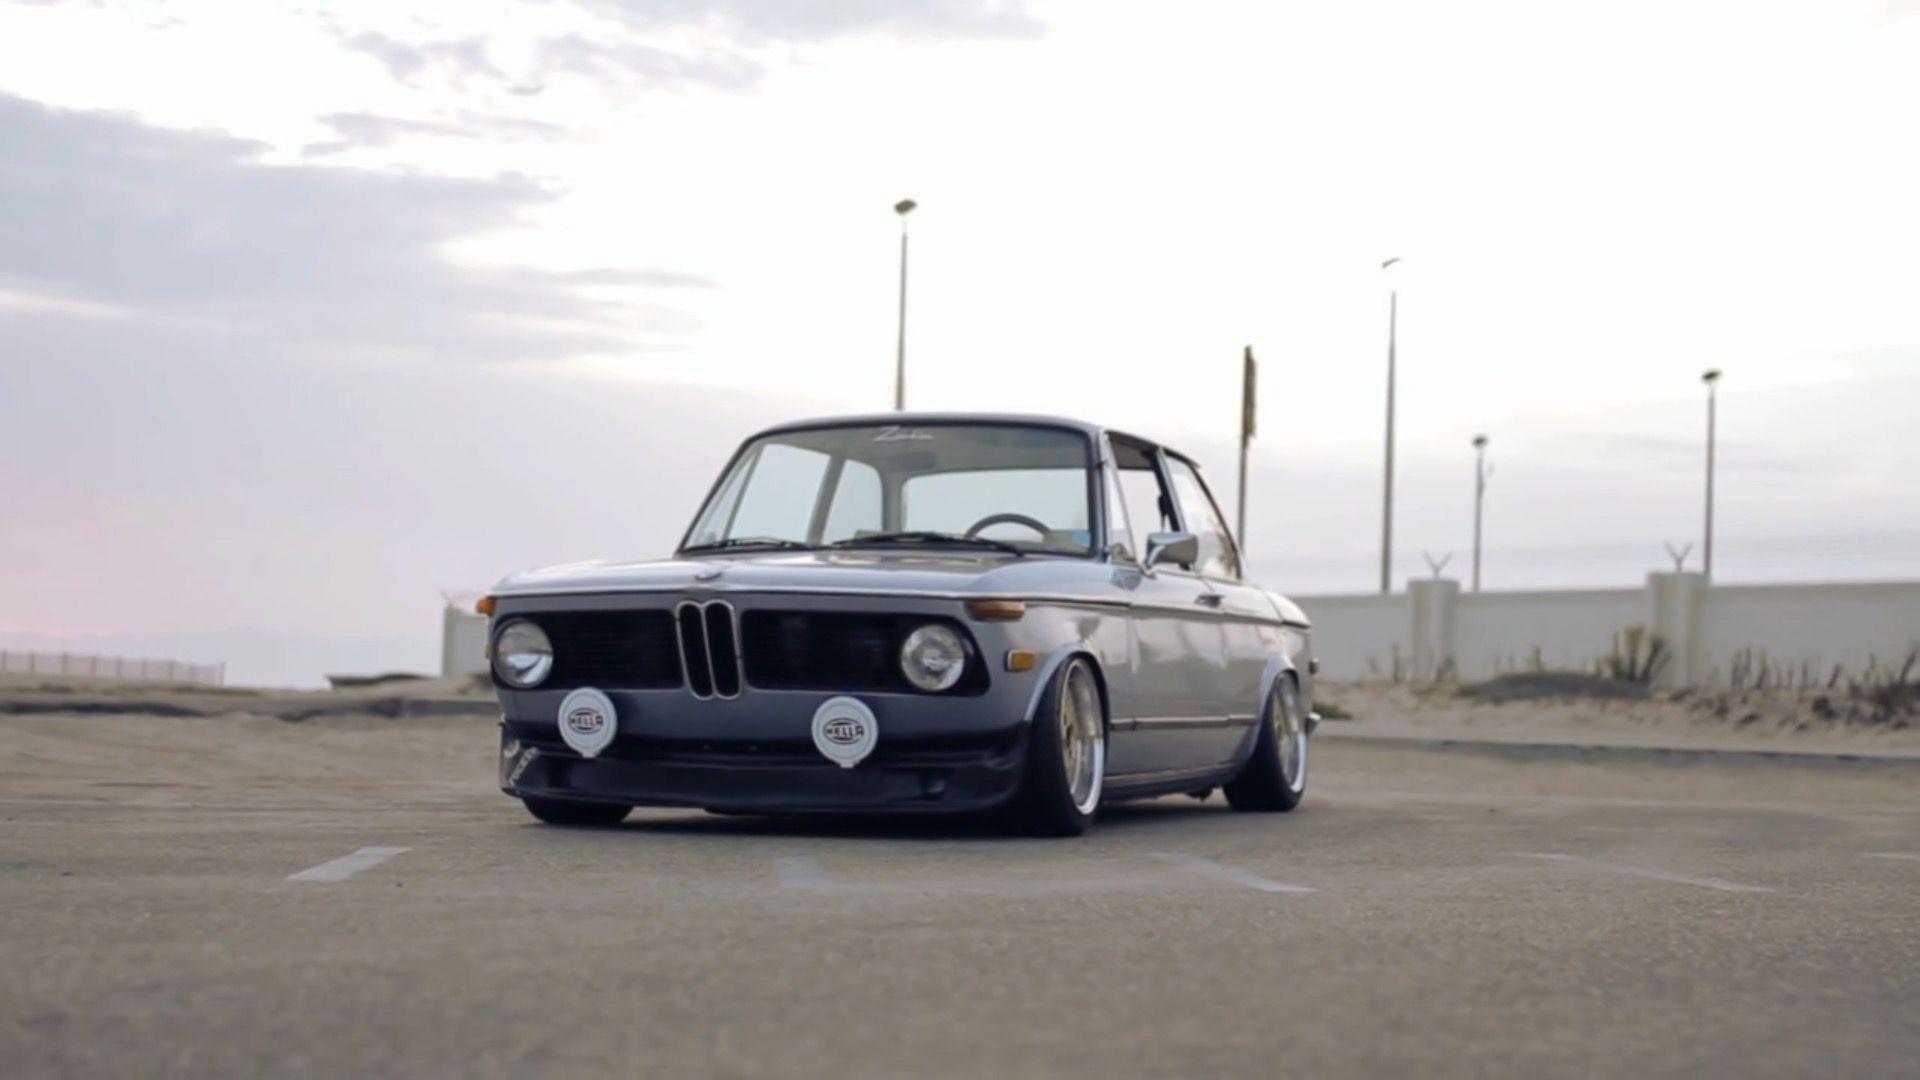 Stunning BMW 2002 Is Somebody's Daily Driver